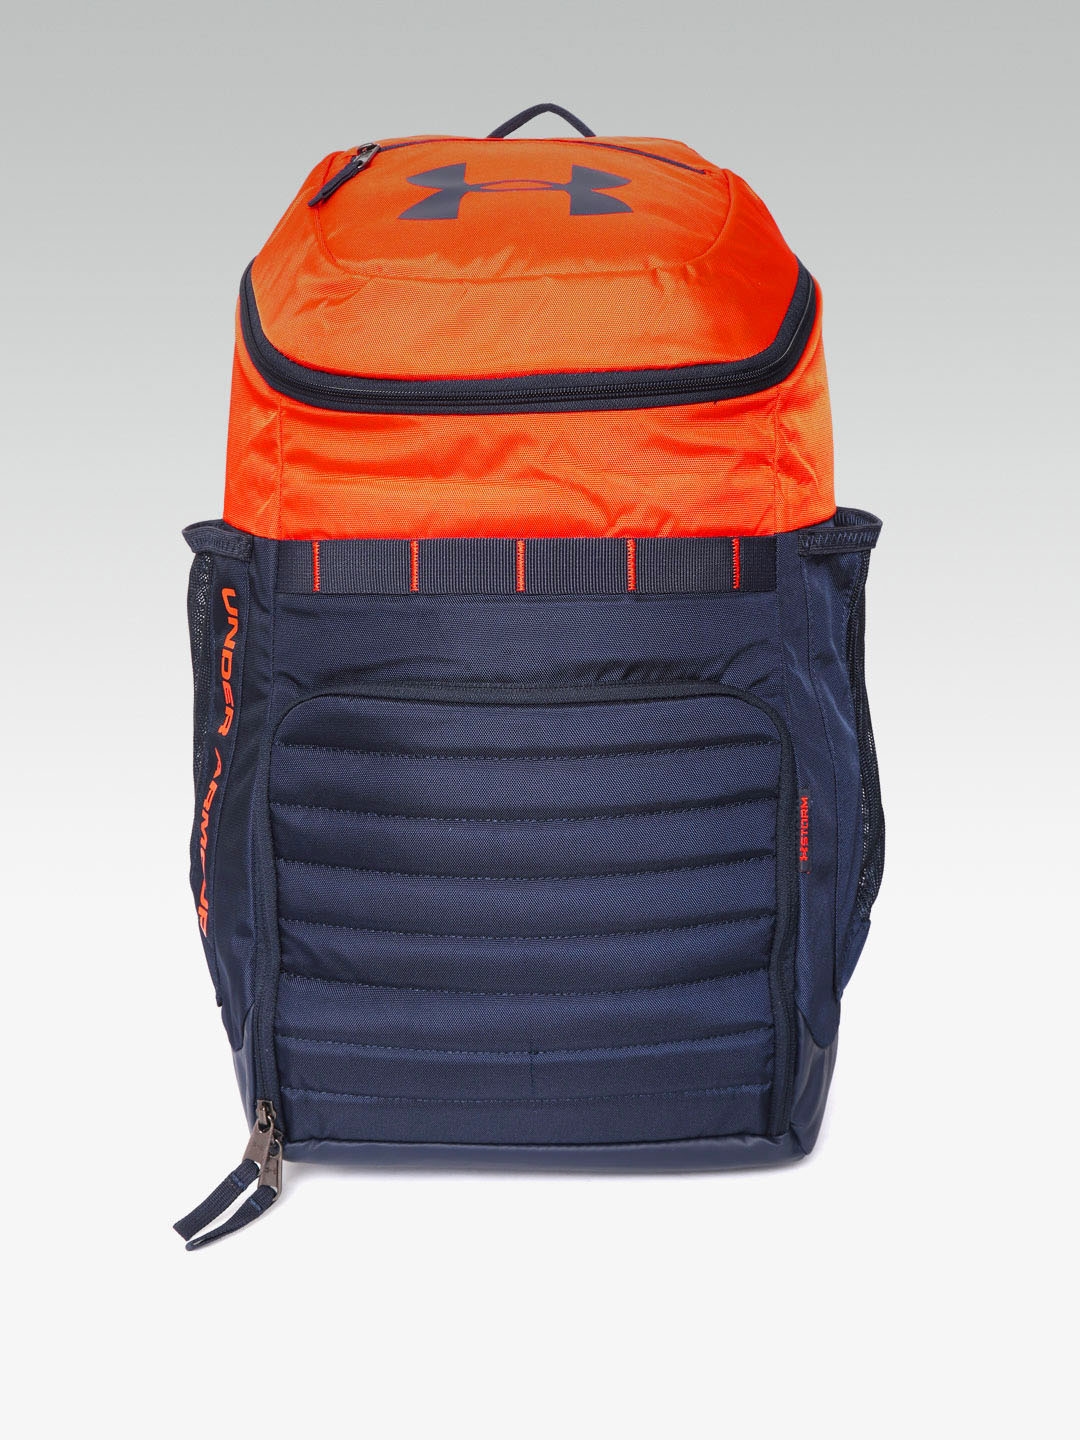 navy blue under armour backpack